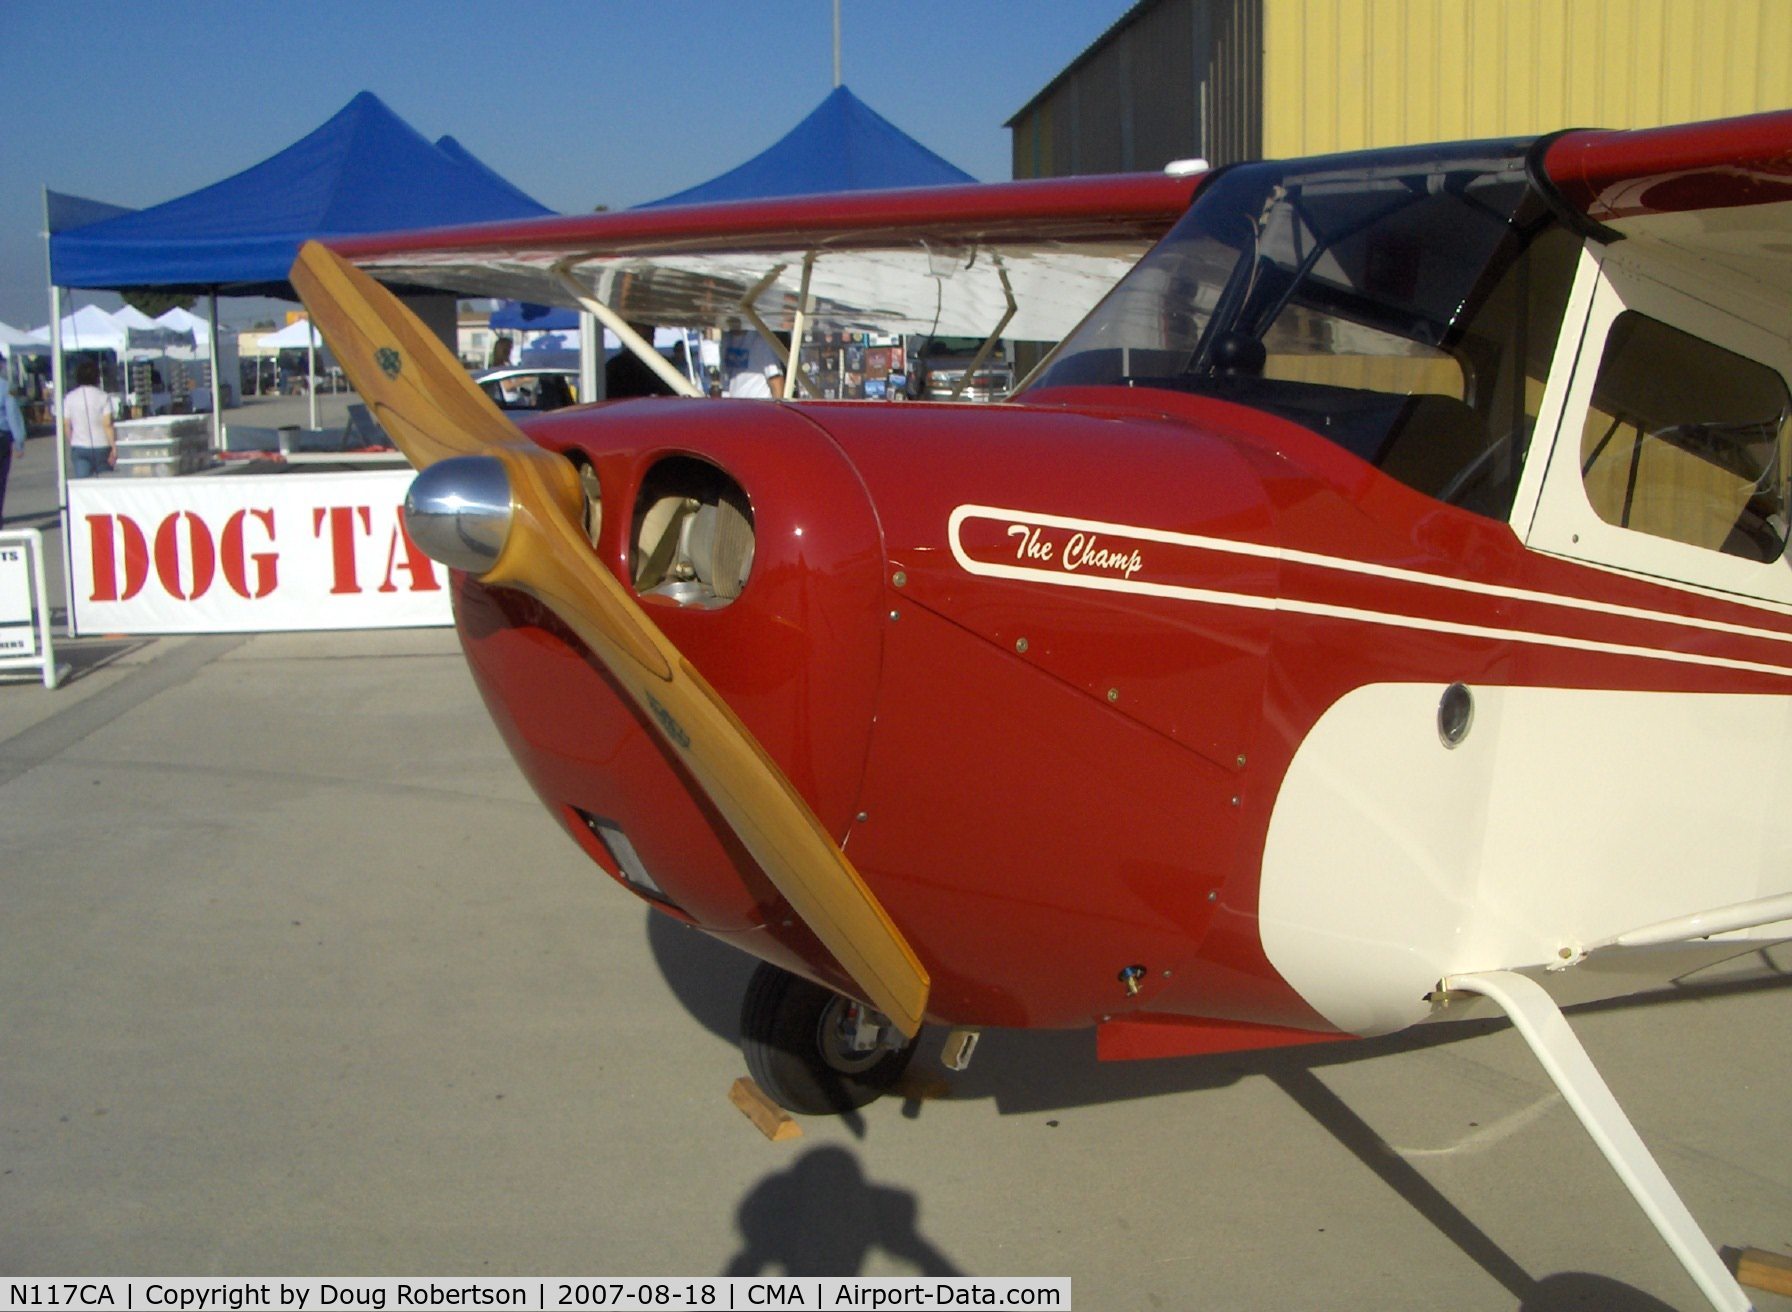 N117CA, American Champion 7EC C/N 1008-2007, 2007 American Champion 7EC CHAMP, Continental O-200 100 Hp, wood prop, reduced fuel capacity to meet LSA 1,320 lb weight requirement